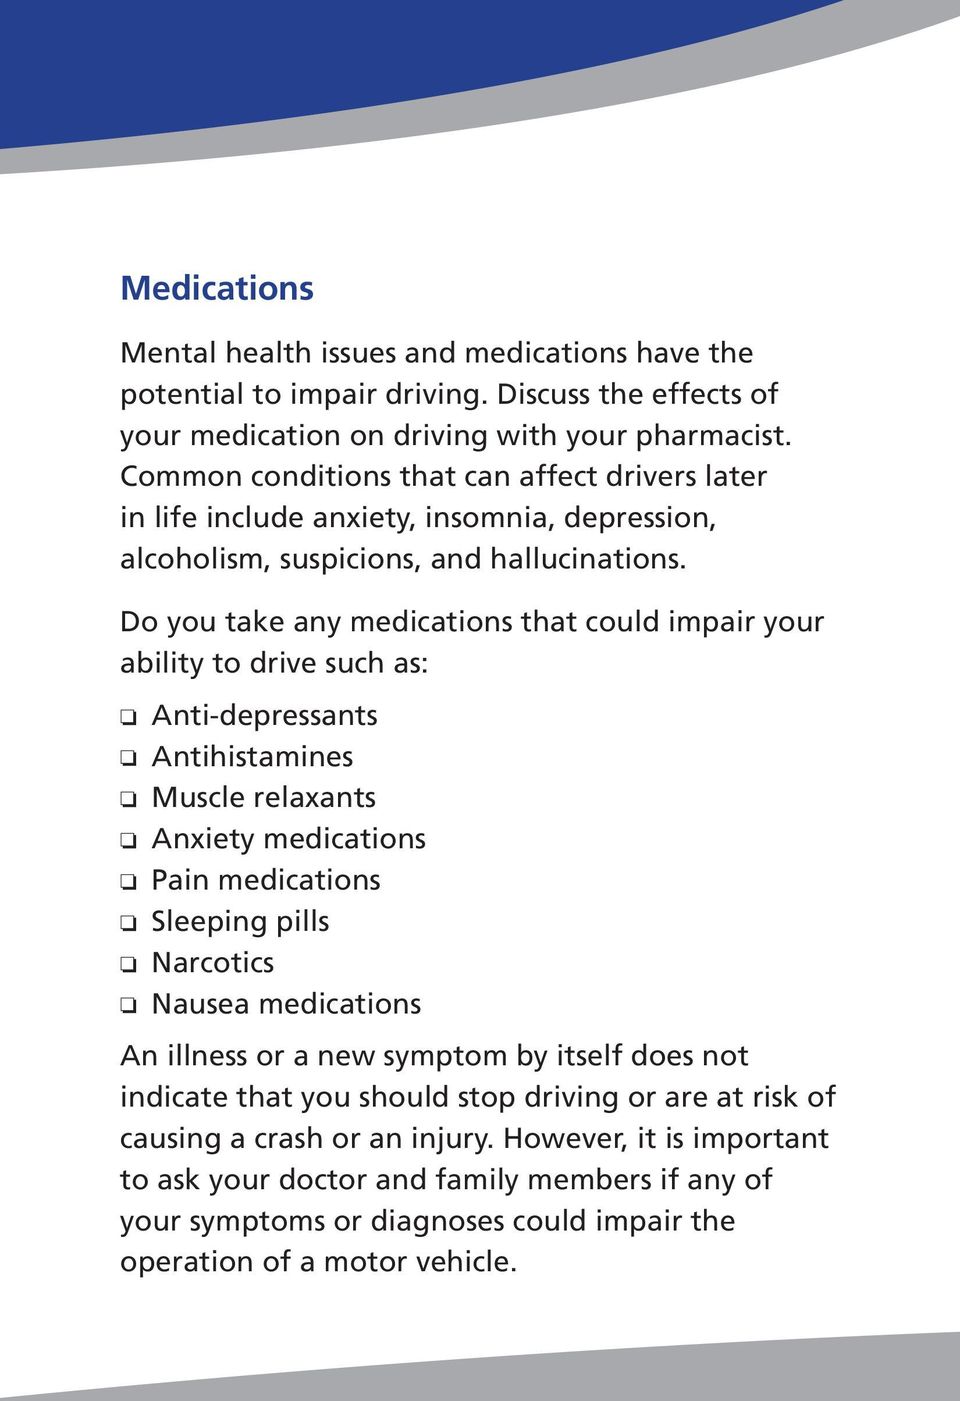 Do you take any medications that could impair your ability to drive such as: o Anti-depressants o Antihistamines o Muscle relaxants o Anxiety medications o Pain medications o Sleeping pills o